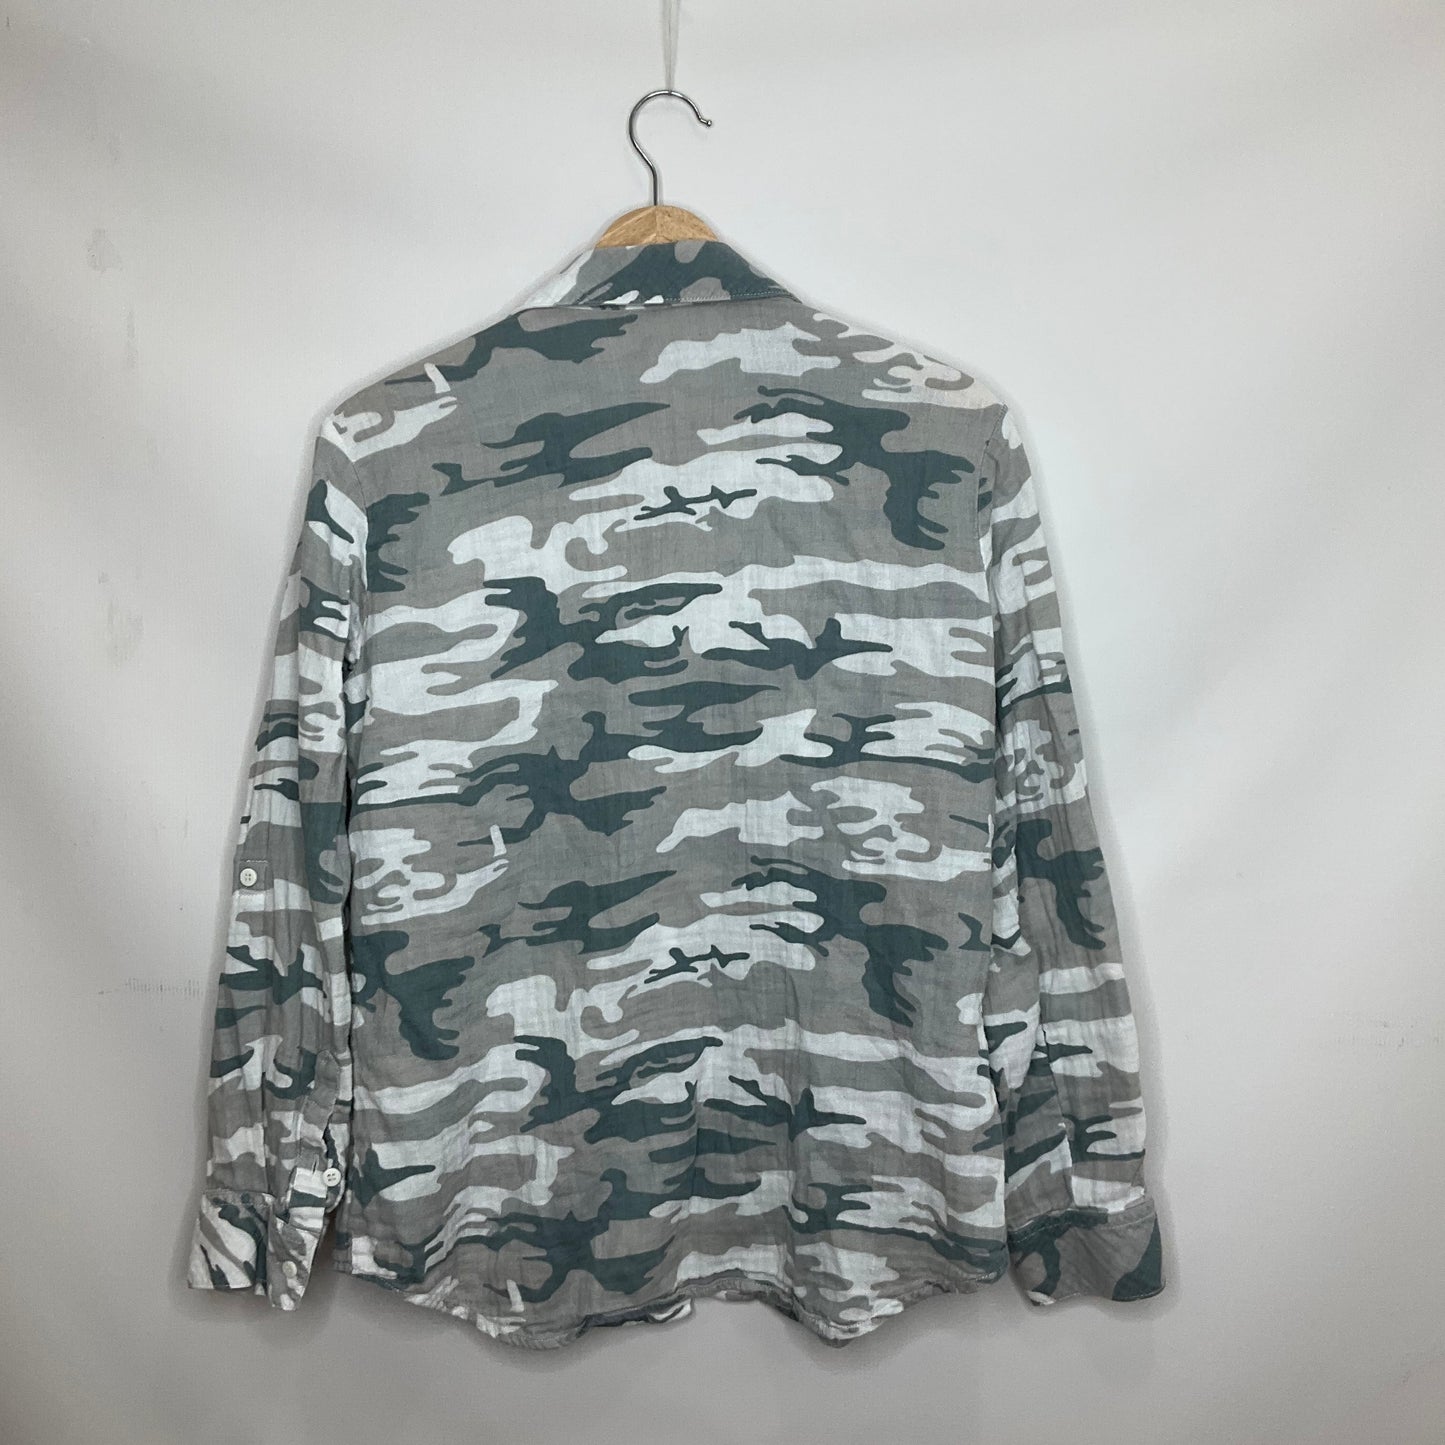 Camouflage Print Top Long Sleeve Sanctuary, Size S